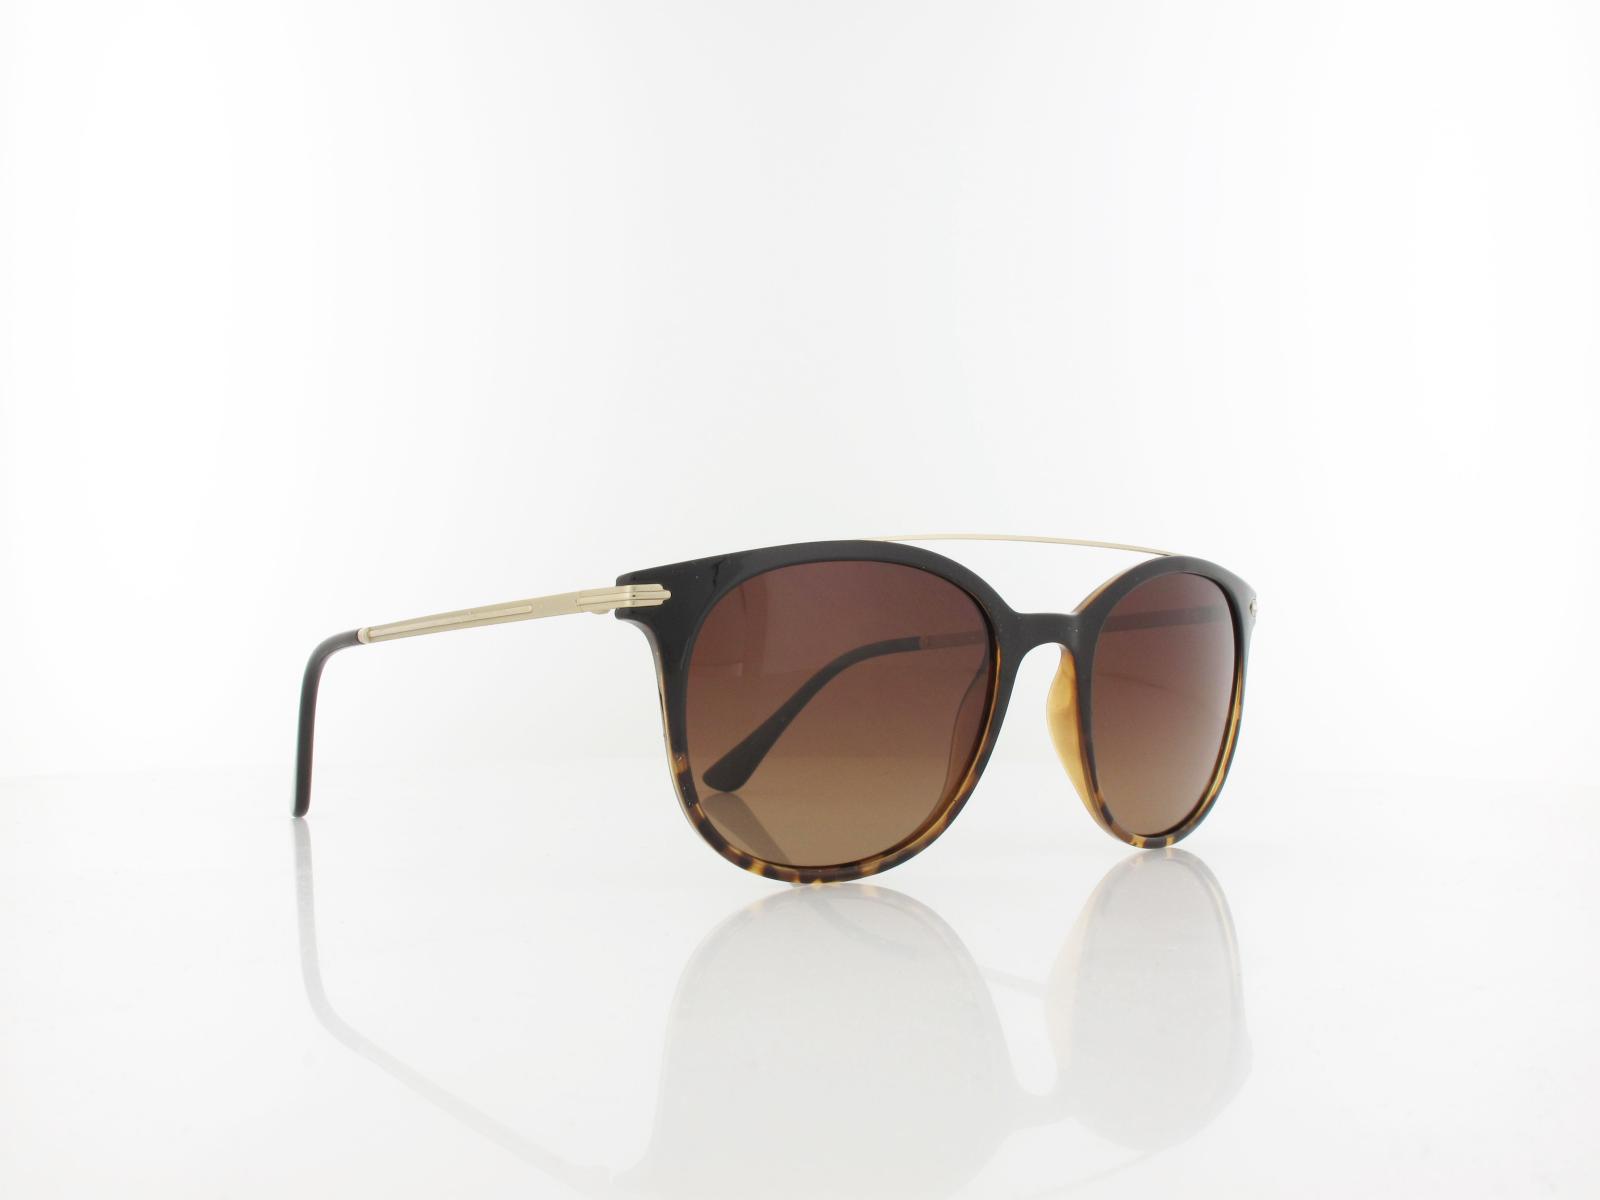 HIS polarized | HPS98101-2 54 | brown / brown gradient with silver flash polarized